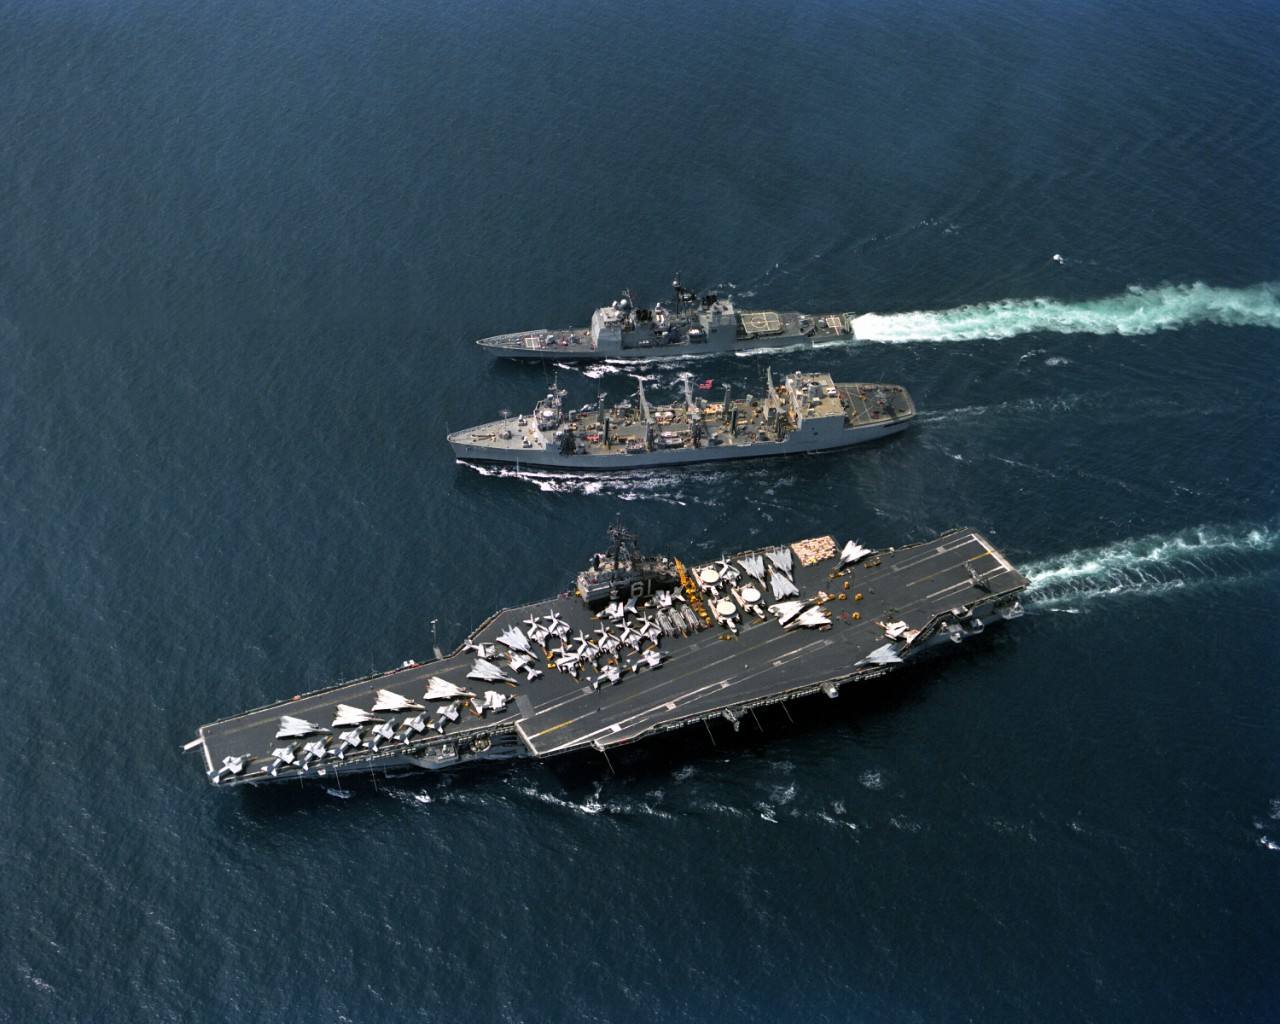 The aircraft carrier Ranger (CV-61) turns to port after completing an underway replenishment with Kansas City as the guided missile cruiser Valley Forge (CG-50) takes on fuel from the replenishment oiler, 28 March 1991. (U.S. Navy Photograph DN-S...